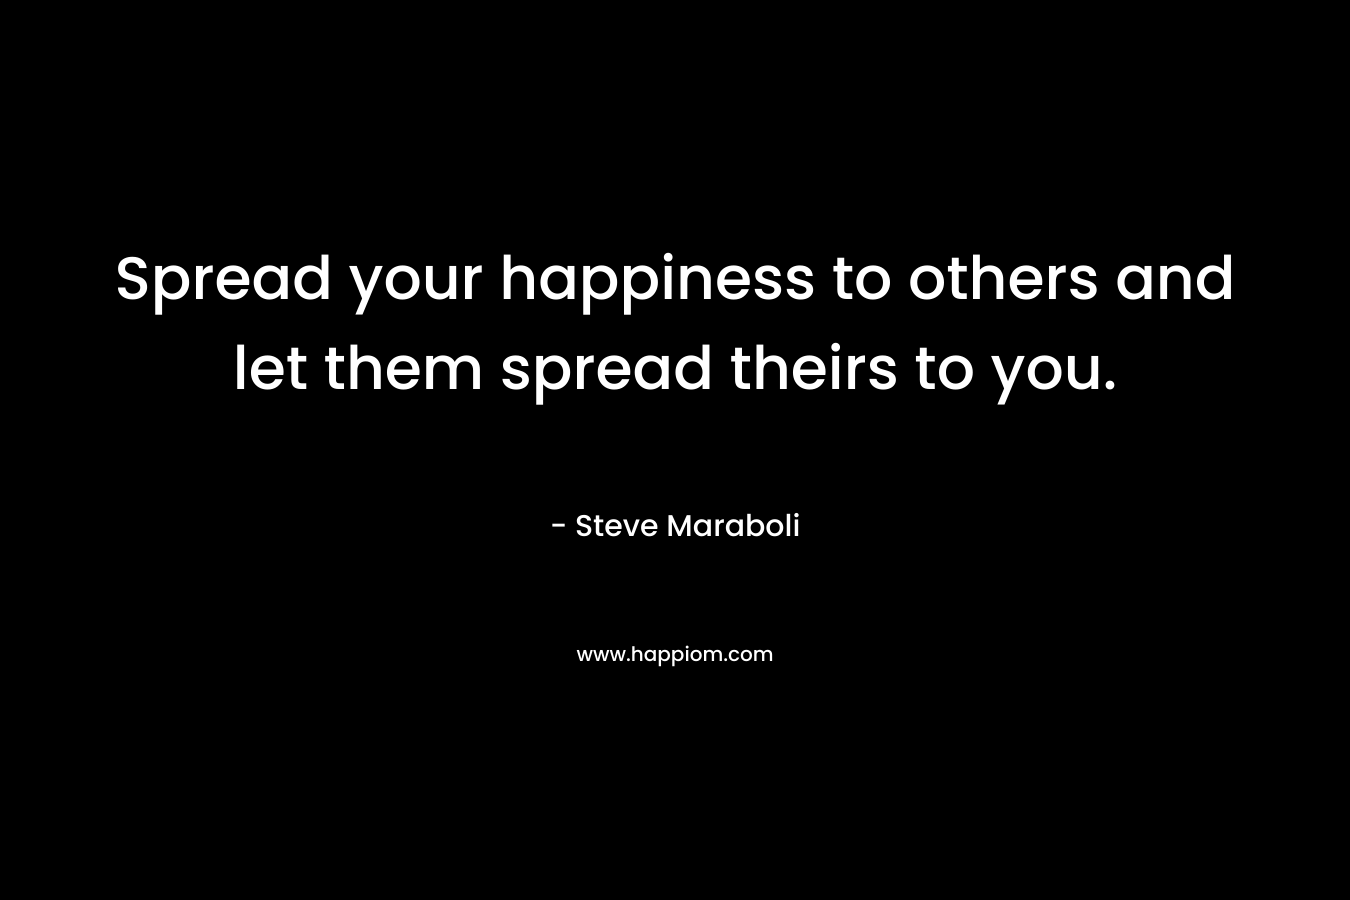 Spread your happiness to others and let them spread theirs to you.